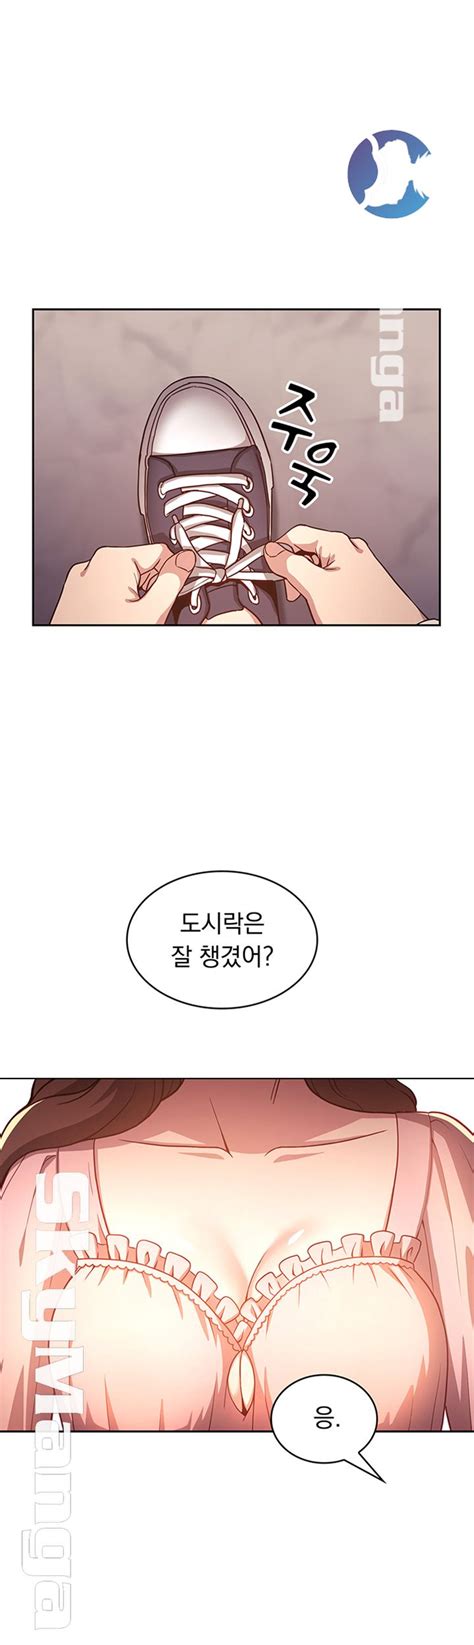 Mother hunting manhwa also known as (aka) mothers hunting. mother hunting raw - Capitulo 1 - manhwa-raw